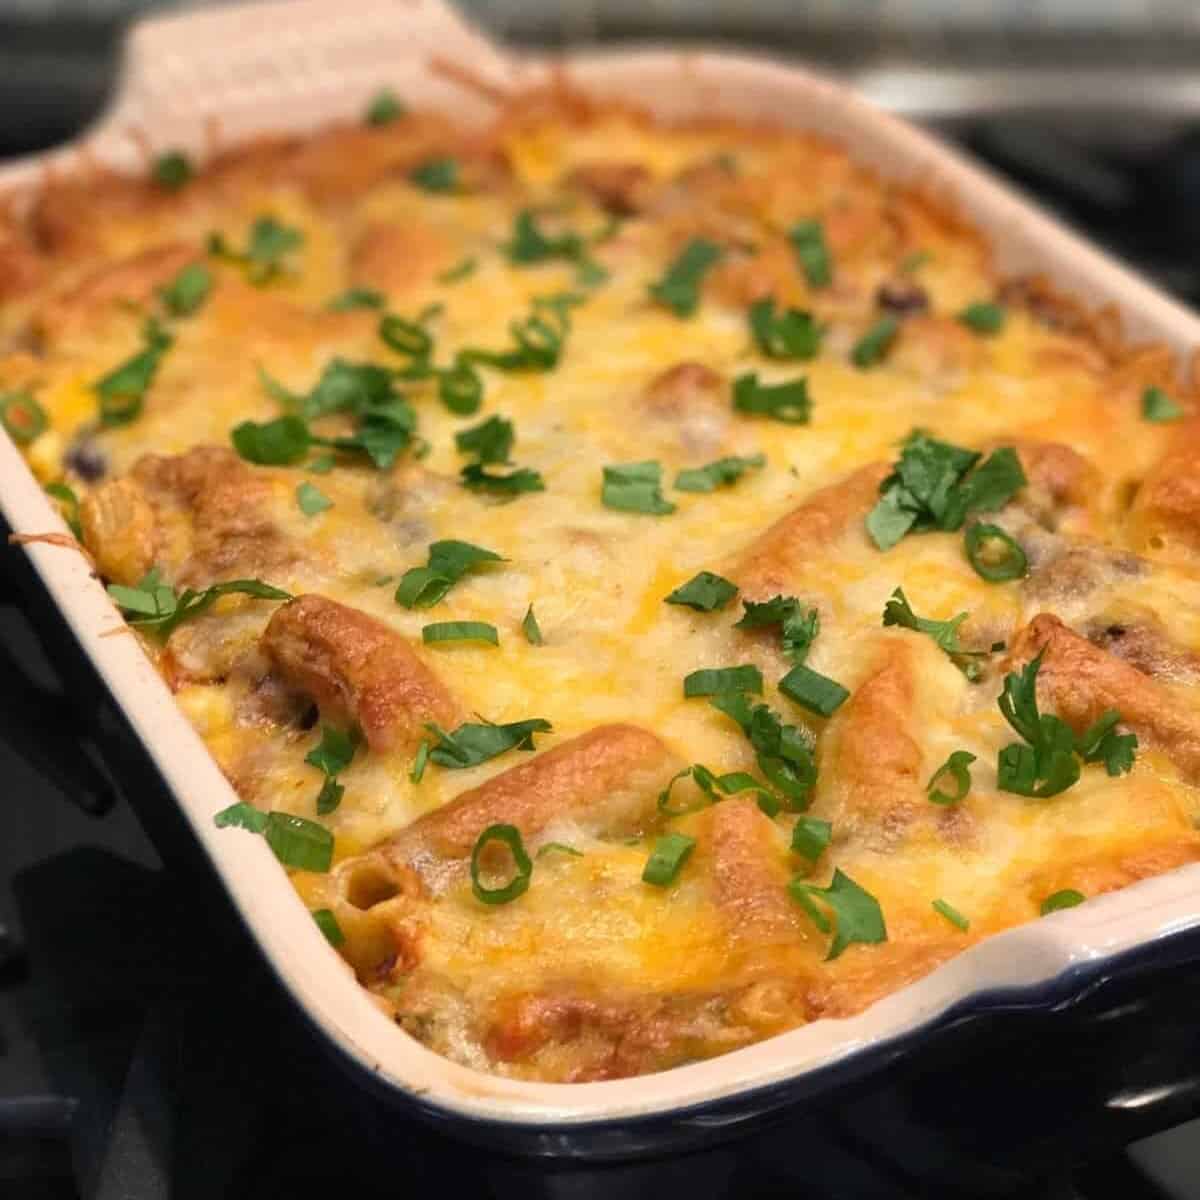 Enchilada Pasta Bake Casserole recipe by foodology geek. made with ziti pasta, enchilada sauce, beans, ground beef, and taco seasoning. topped with monterey cheese and baked until golden brown and bubbly.